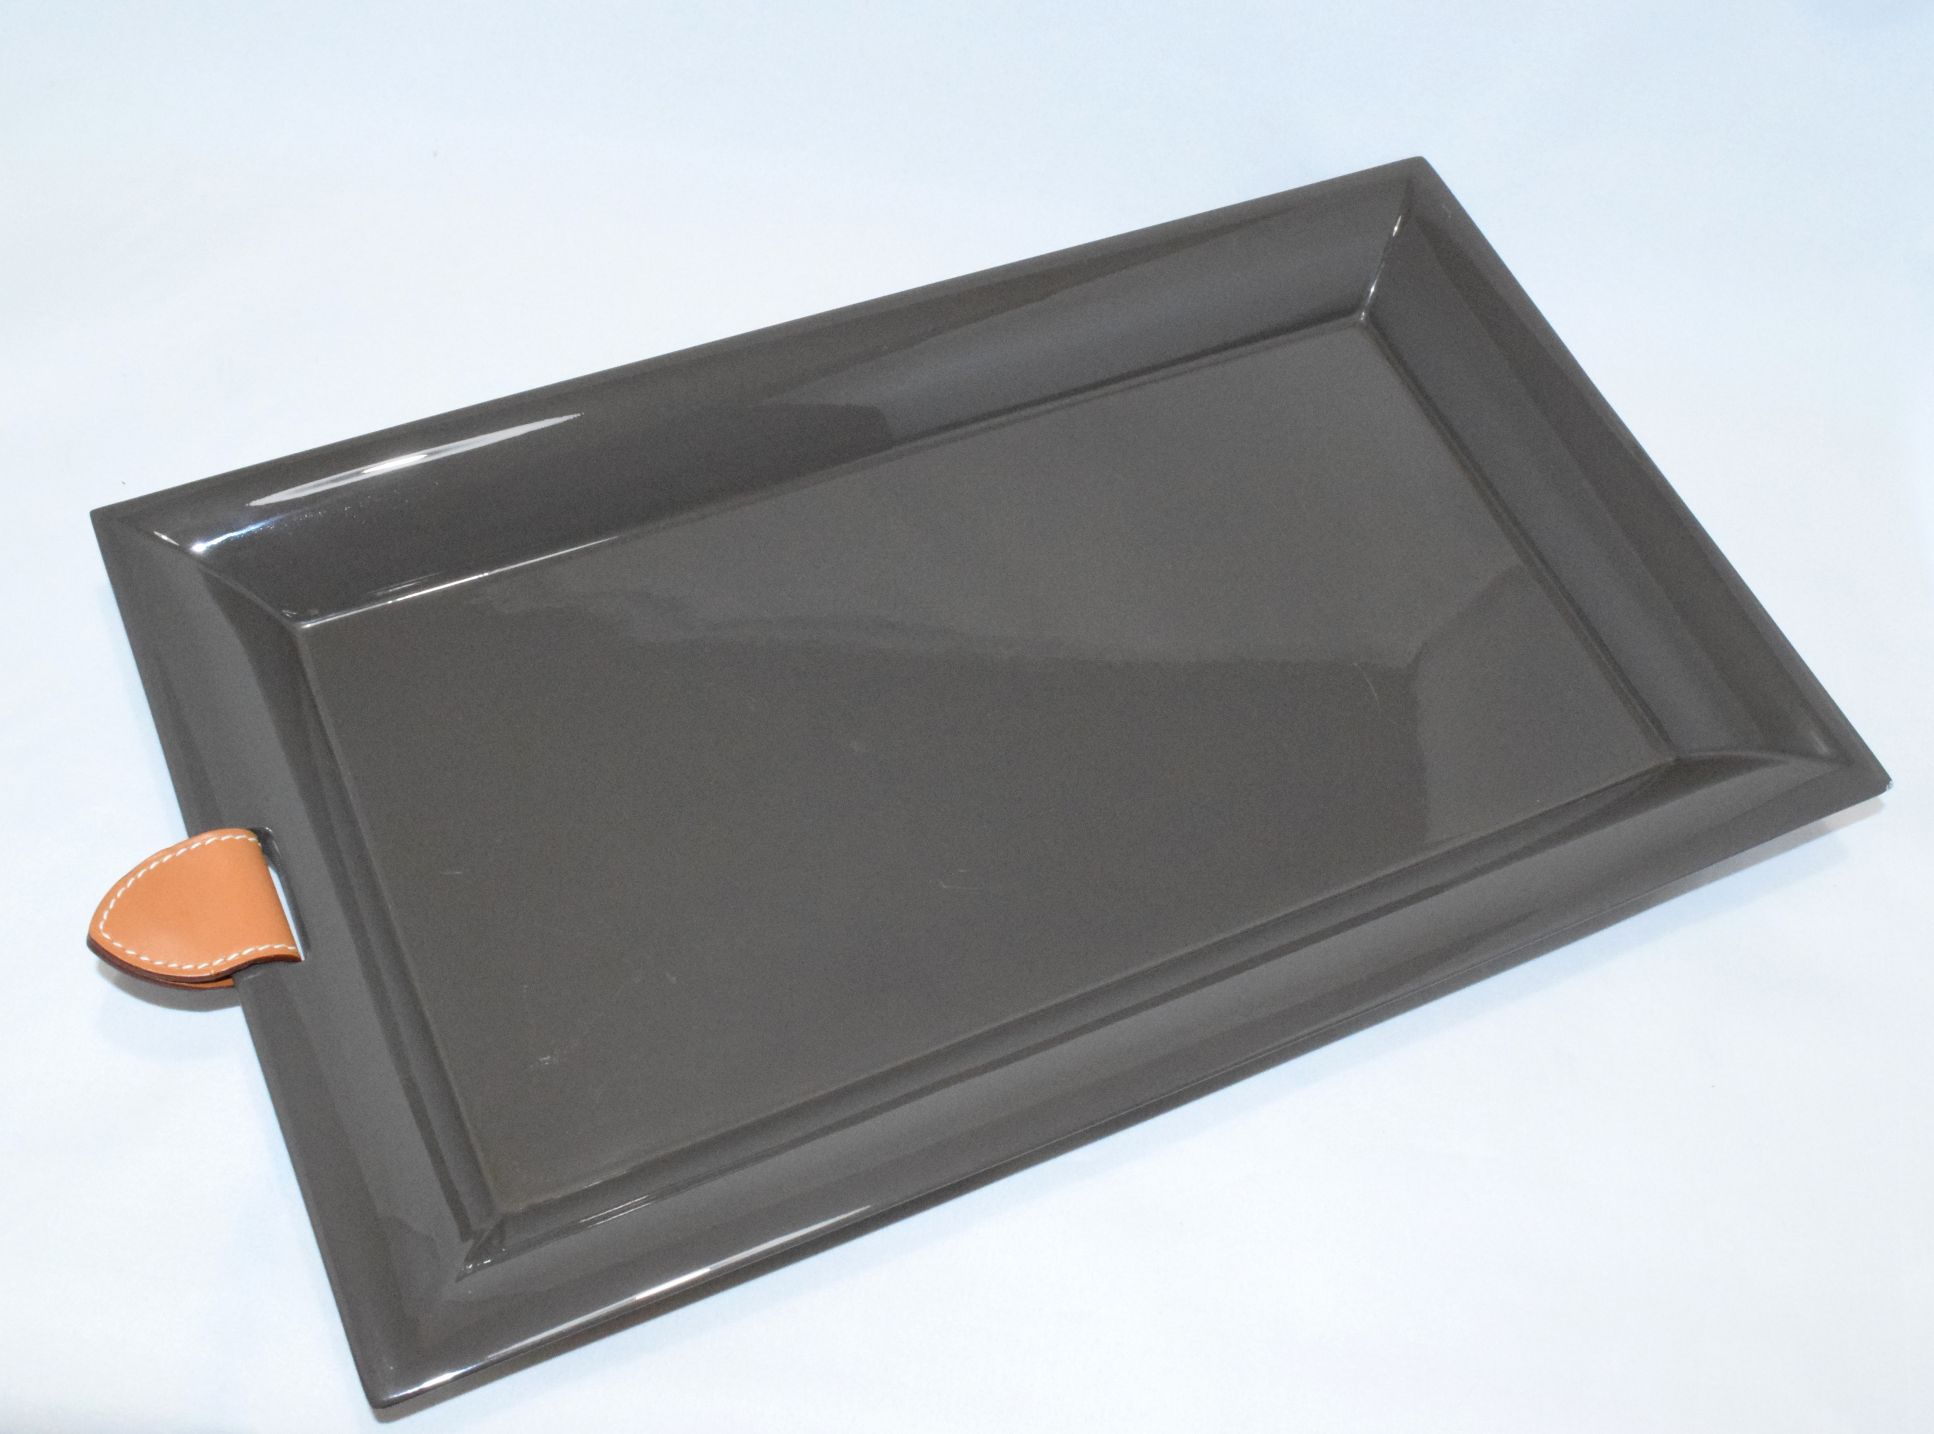 Hermes LACQUER Jepara Long change Tray 14 x 7.5 étoupe Leather